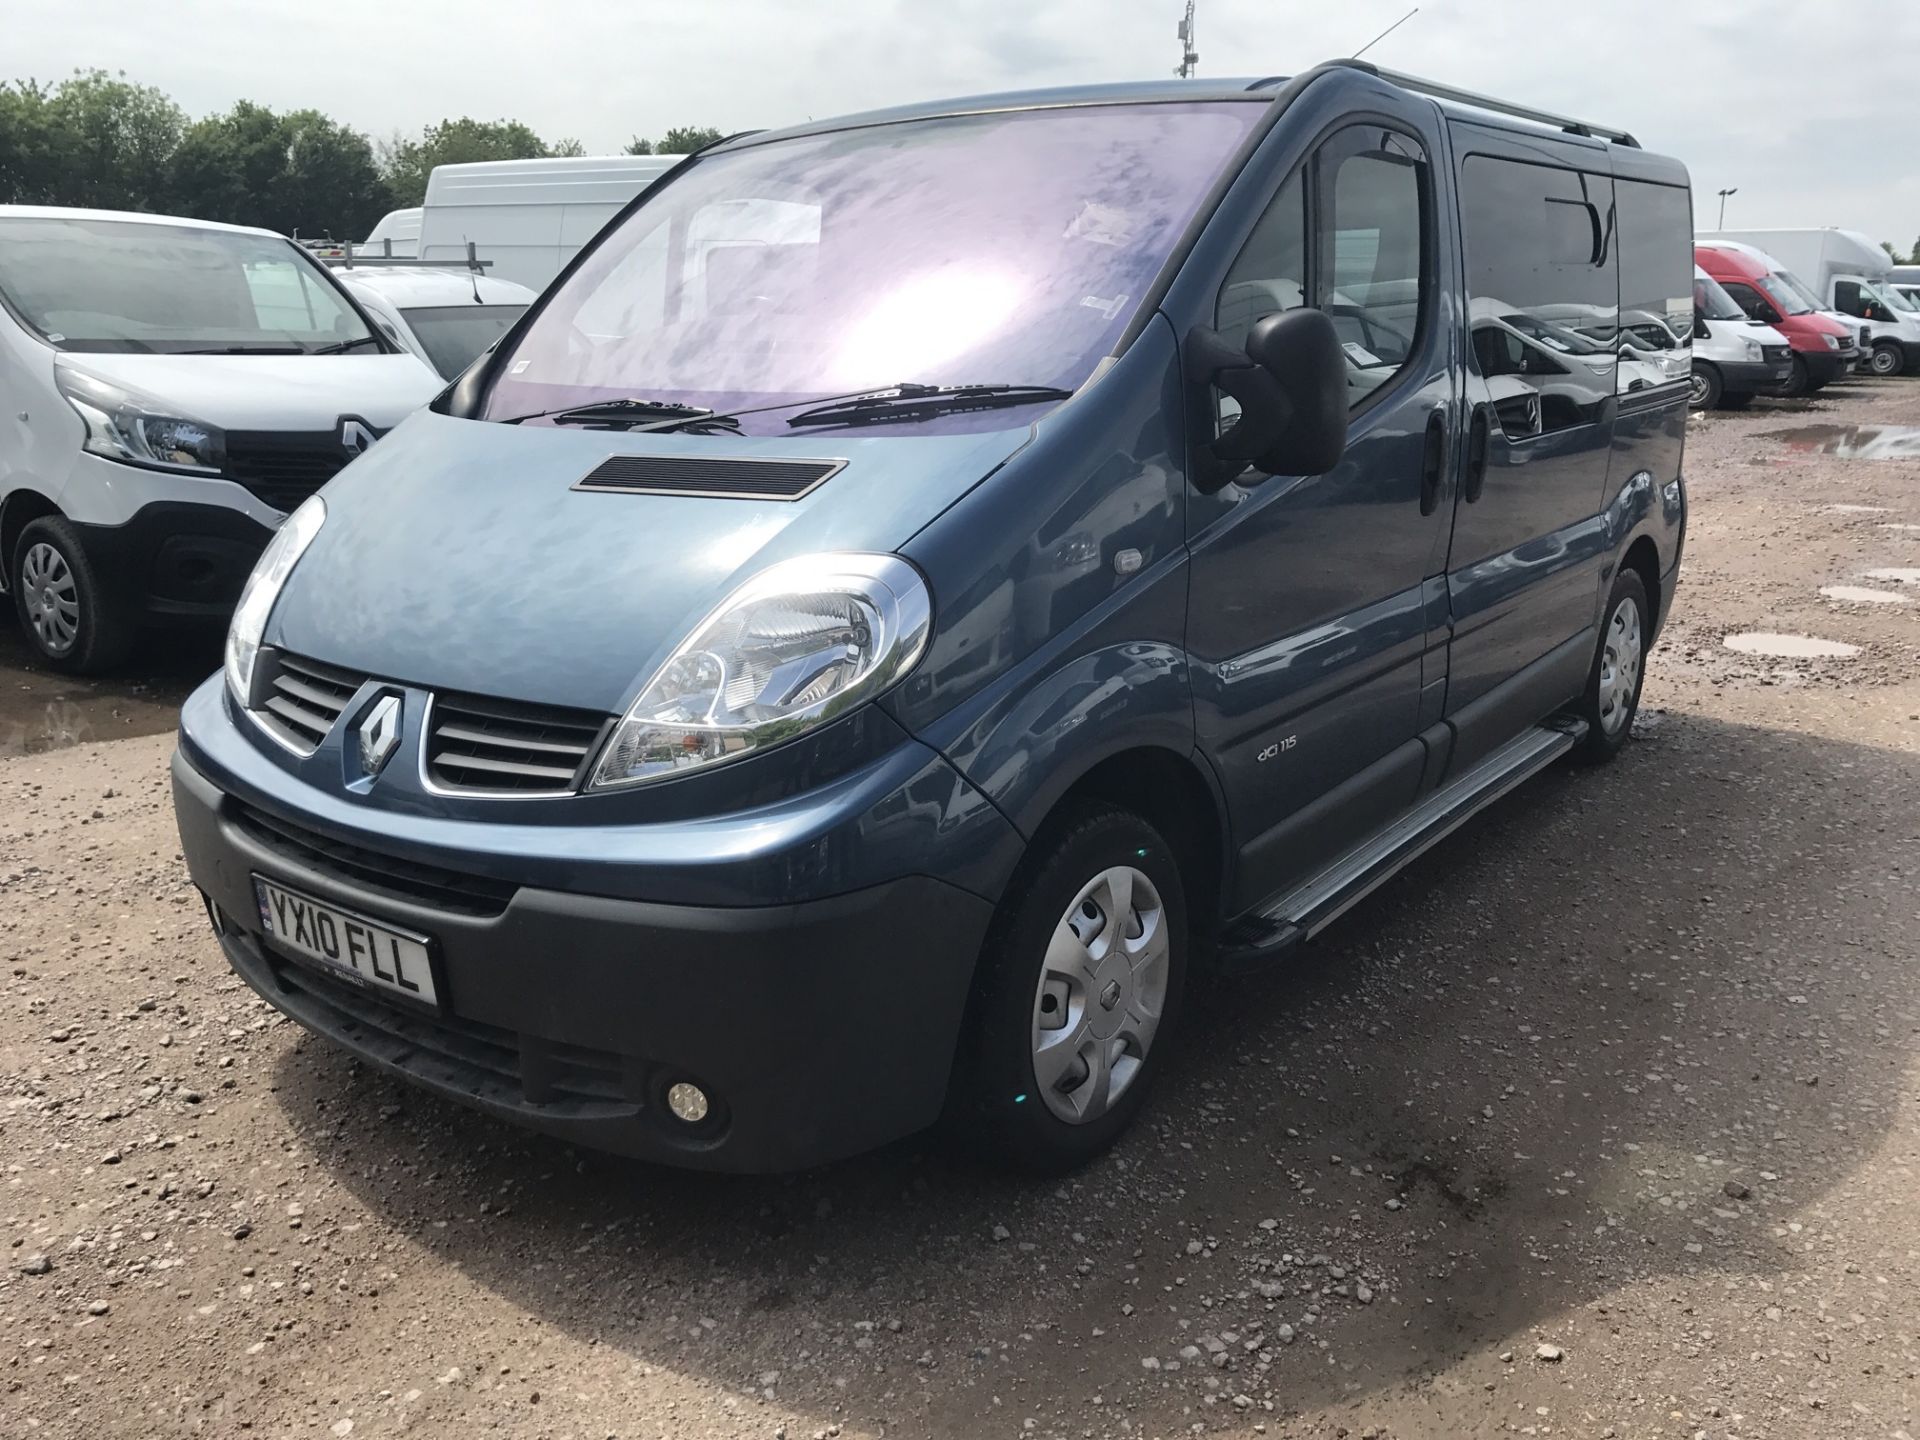 2010 10 REG RENAULT TRAFIC DISABLED ACCESS MINIBUS DIESEL AUTOMATIC 92k MILES - Image 6 of 12